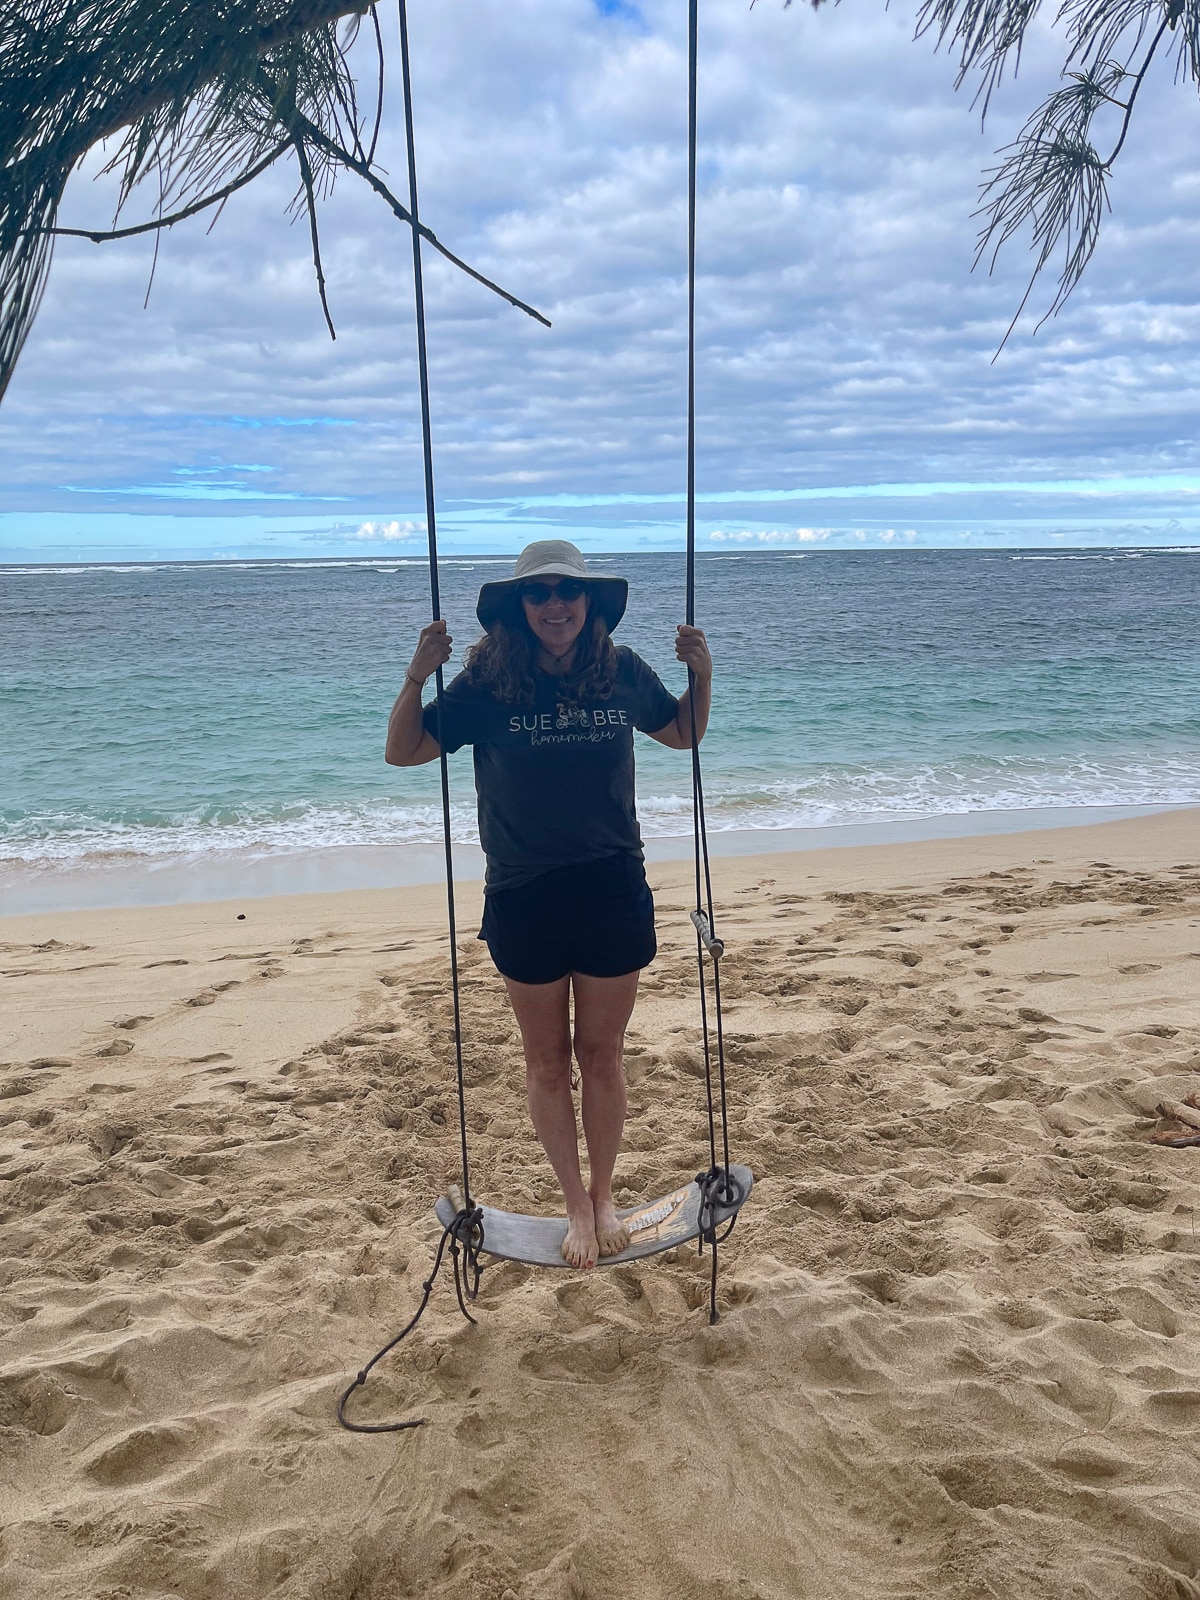 Me standing on the swing by the ocean.